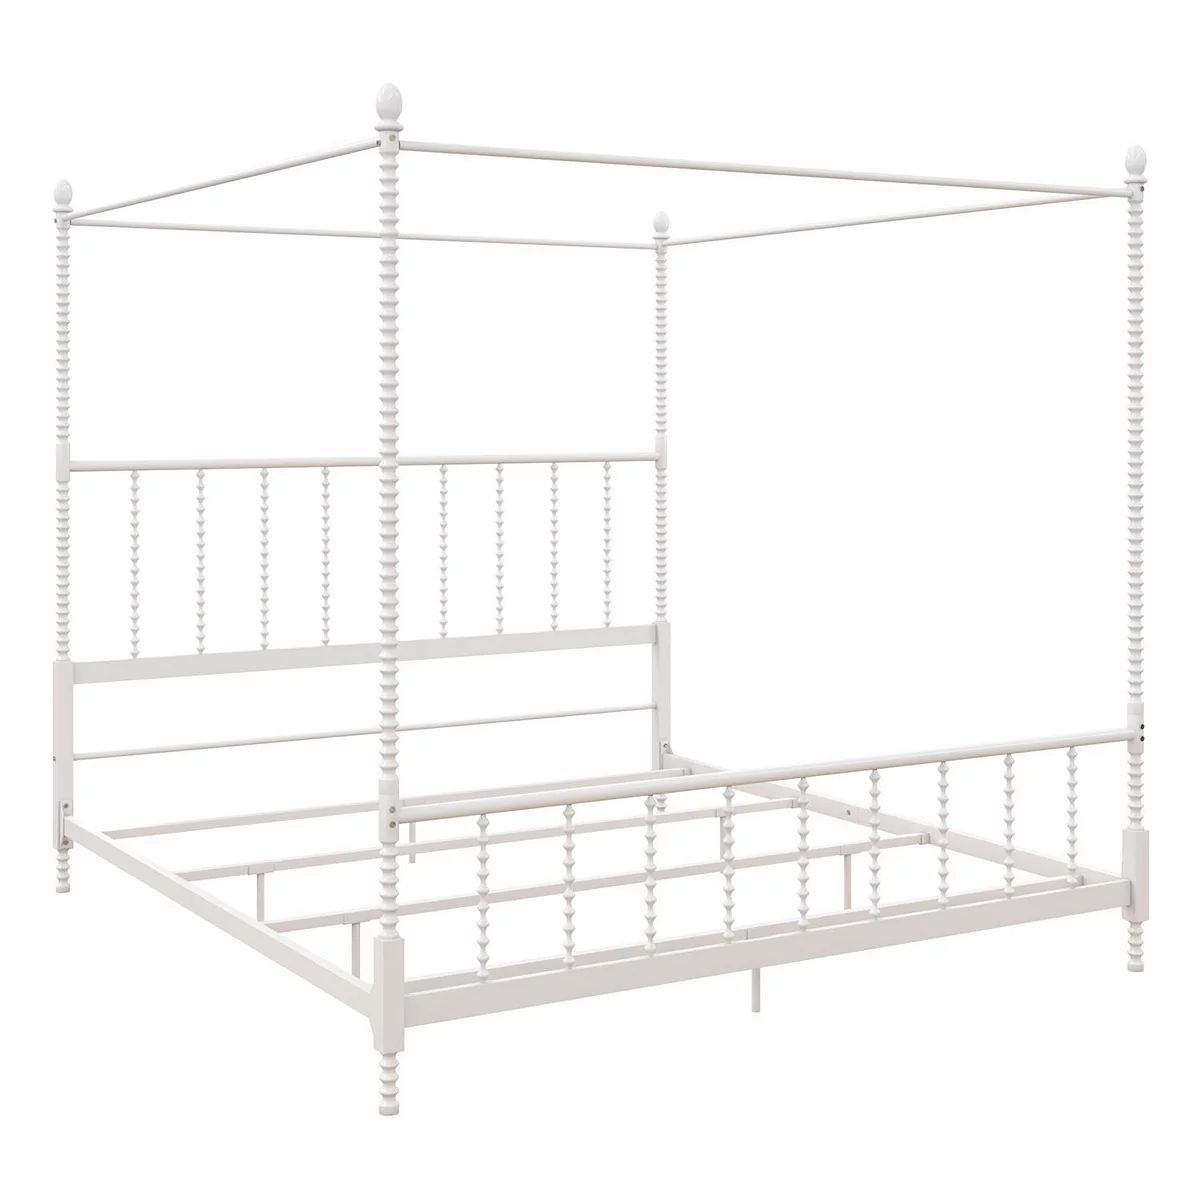 Atwater Living Krissy Spindle Canopy Full Bed | Kohl's